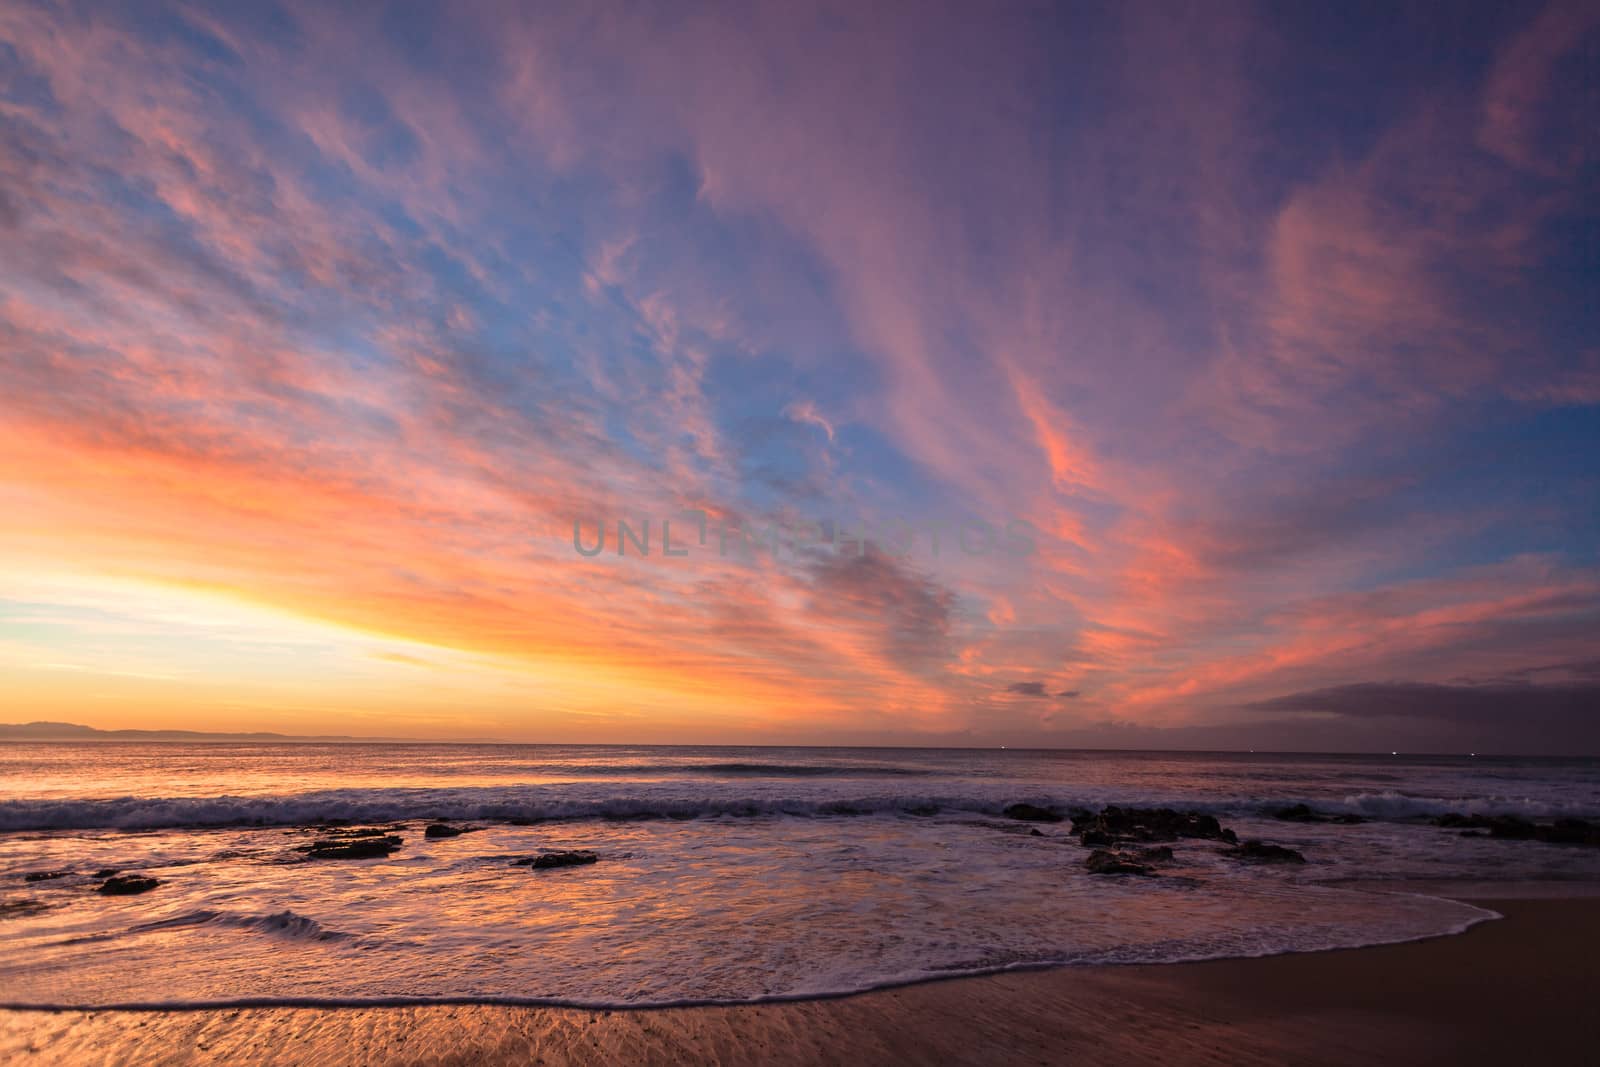 Dawn morning light colors the cirrus clouds blue sky beach ocean waves in amazing color canvas of nature for a moment.